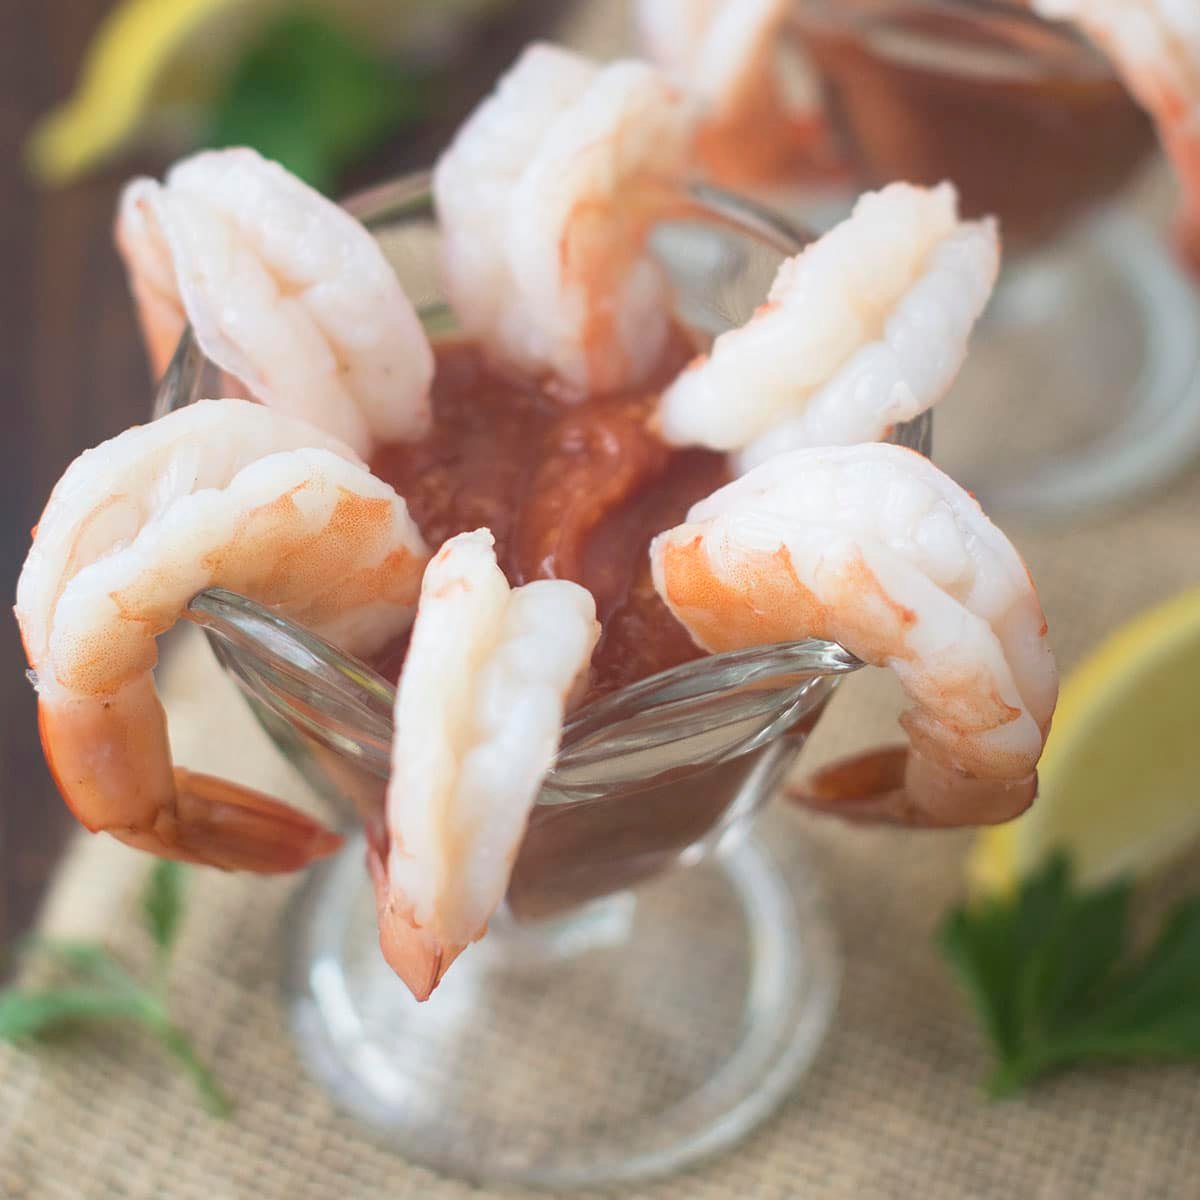 Classic shrimp cocktail served in a glass.